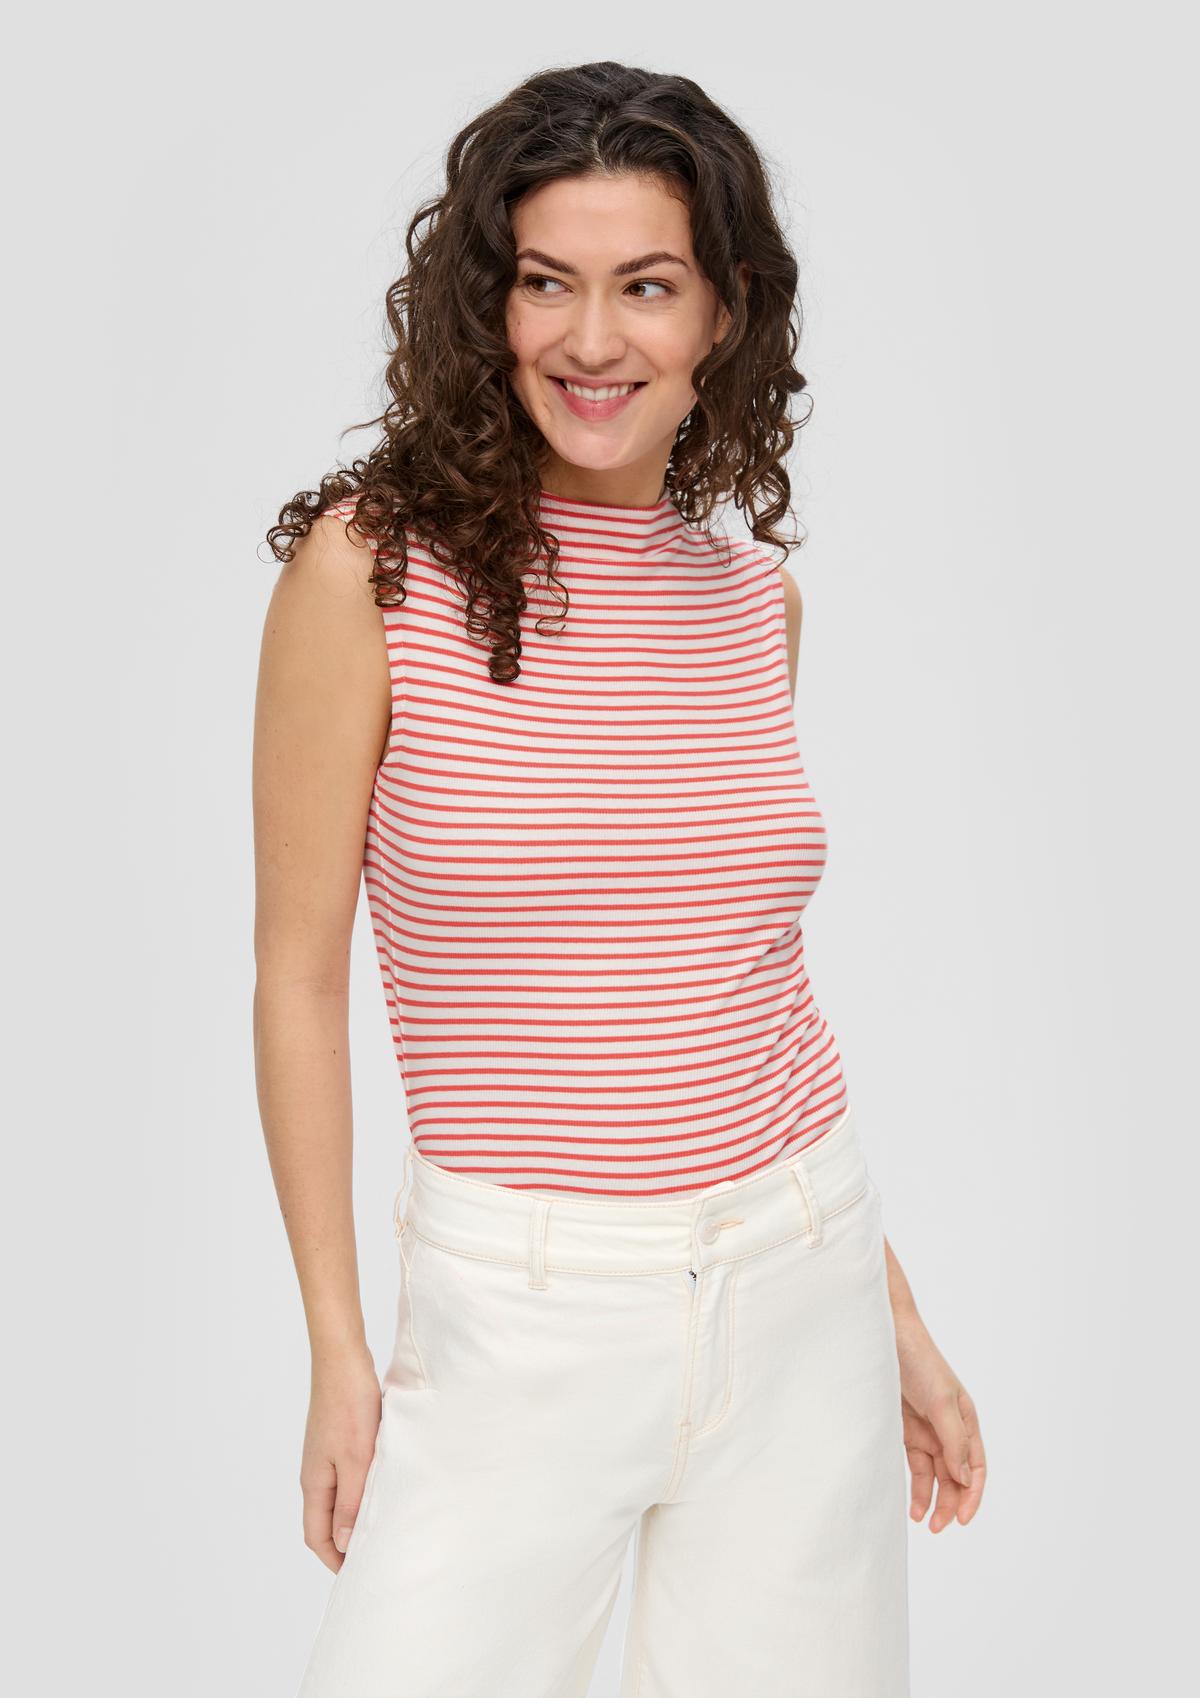 Sleeveless top made of stretch cotton